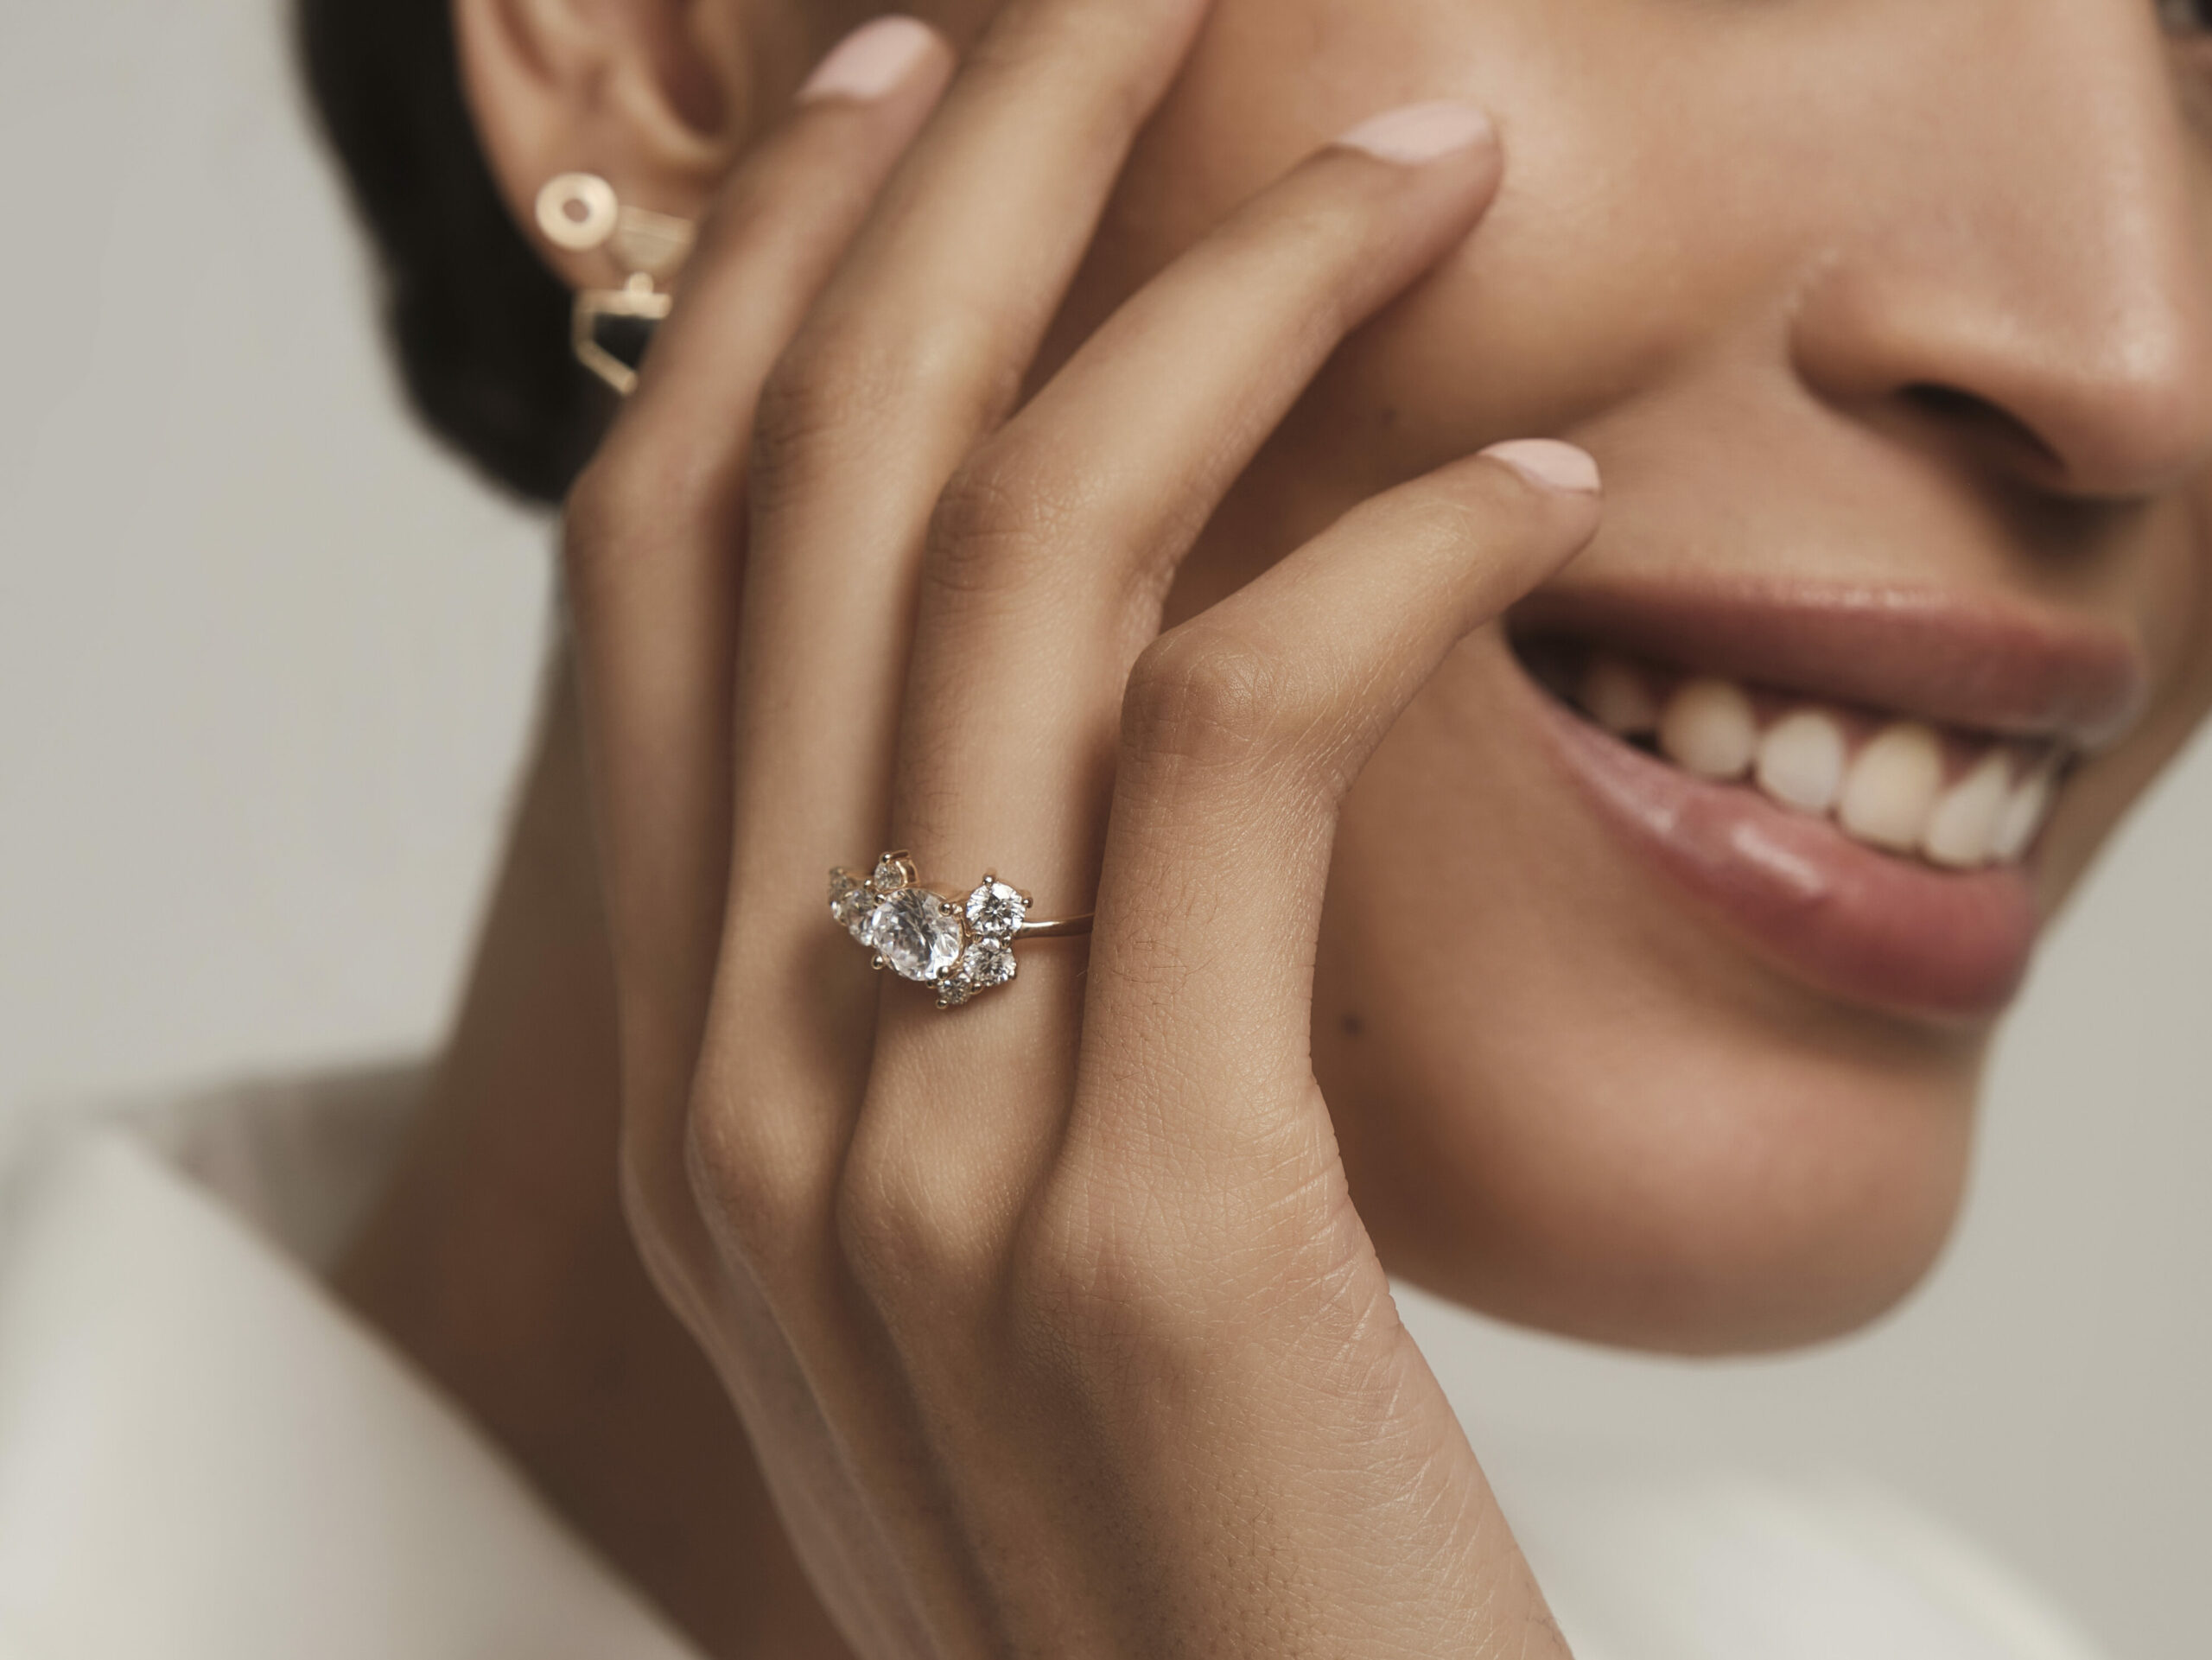 Hand placed gently on model's cheek. Ring finger wearing a Burst Cluster Diamond Ring. Model smiling, hand in focus